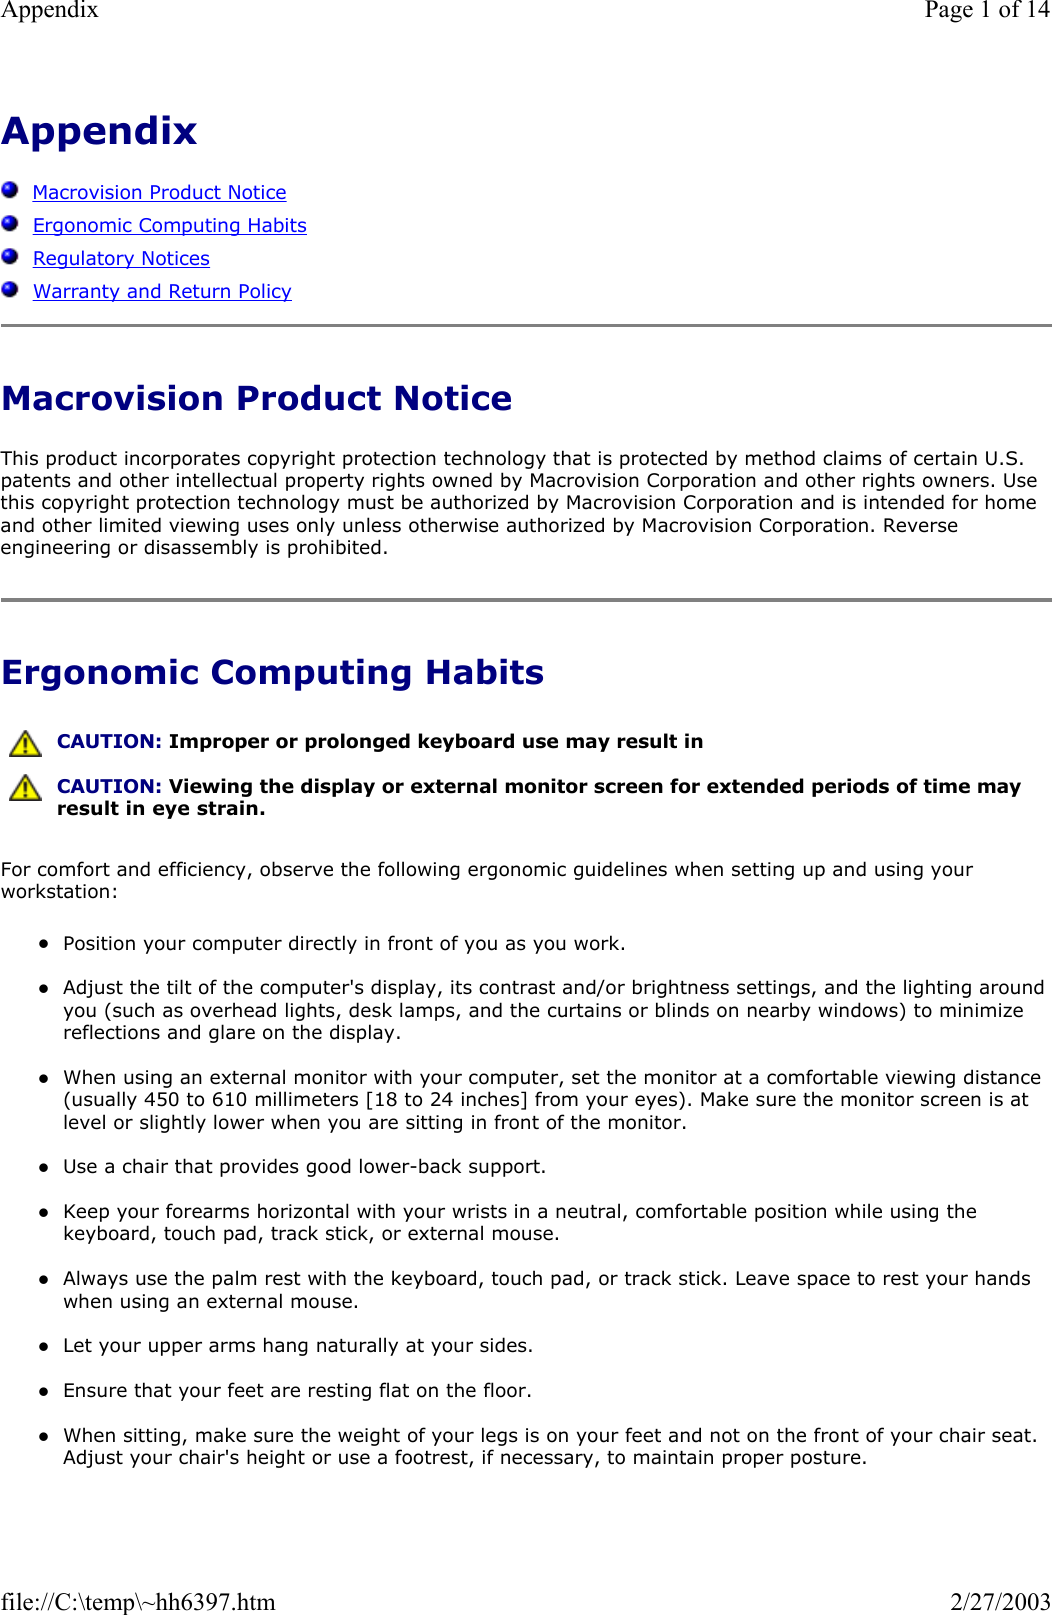 Appendix      Macrovision Product Notice   Ergonomic Computing Habits   Regulatory Notices   Warranty and Return Policy Macrovision Product Notice This product incorporates copyright protection technology that is protected by method claims of certain U.S. patents and other intellectual property rights owned by Macrovision Corporation and other rights owners. Use this copyright protection technology must be authorized by Macrovision Corporation and is intended for home and other limited viewing uses only unless otherwise authorized by Macrovision Corporation. Reverse engineering or disassembly is prohibited. Ergonomic Computing Habits For comfort and efficiency, observe the following ergonomic guidelines when setting up and using your workstation: zPosition your computer directly in front of you as you work.  zAdjust the tilt of the computer&apos;s display, its contrast and/or brightness settings, and the lighting around you (such as overhead lights, desk lamps, and the curtains or blinds on nearby windows) to minimize reflections and glare on the display.  zWhen using an external monitor with your computer, set the monitor at a comfortable viewing distance (usually 450 to 610 millimeters [18 to 24 inches] from your eyes). Make sure the monitor screen is at level or slightly lower when you are sitting in front of the monitor.   zUse a chair that provides good lower-back support.  zKeep your forearms horizontal with your wrists in a neutral, comfortable position while using the keyboard, touch pad, track stick, or external mouse.  zAlways use the palm rest with the keyboard, touch pad, or track stick. Leave space to rest your hands when using an external mouse.  zLet your upper arms hang naturally at your sides.  zEnsure that your feet are resting flat on the floor.  zWhen sitting, make sure the weight of your legs is on your feet and not on the front of your chair seat. Adjust your chair&apos;s height or use a footrest, if necessary, to maintain proper posture.   CAUTION: Improper or prolonged keyboard use may result in  CAUTION: Viewing the display or external monitor screen for extended periods of time may result in eye strain.Page 1 of 14Appendix2/27/2003file://C:\temp\~hh6397.htm